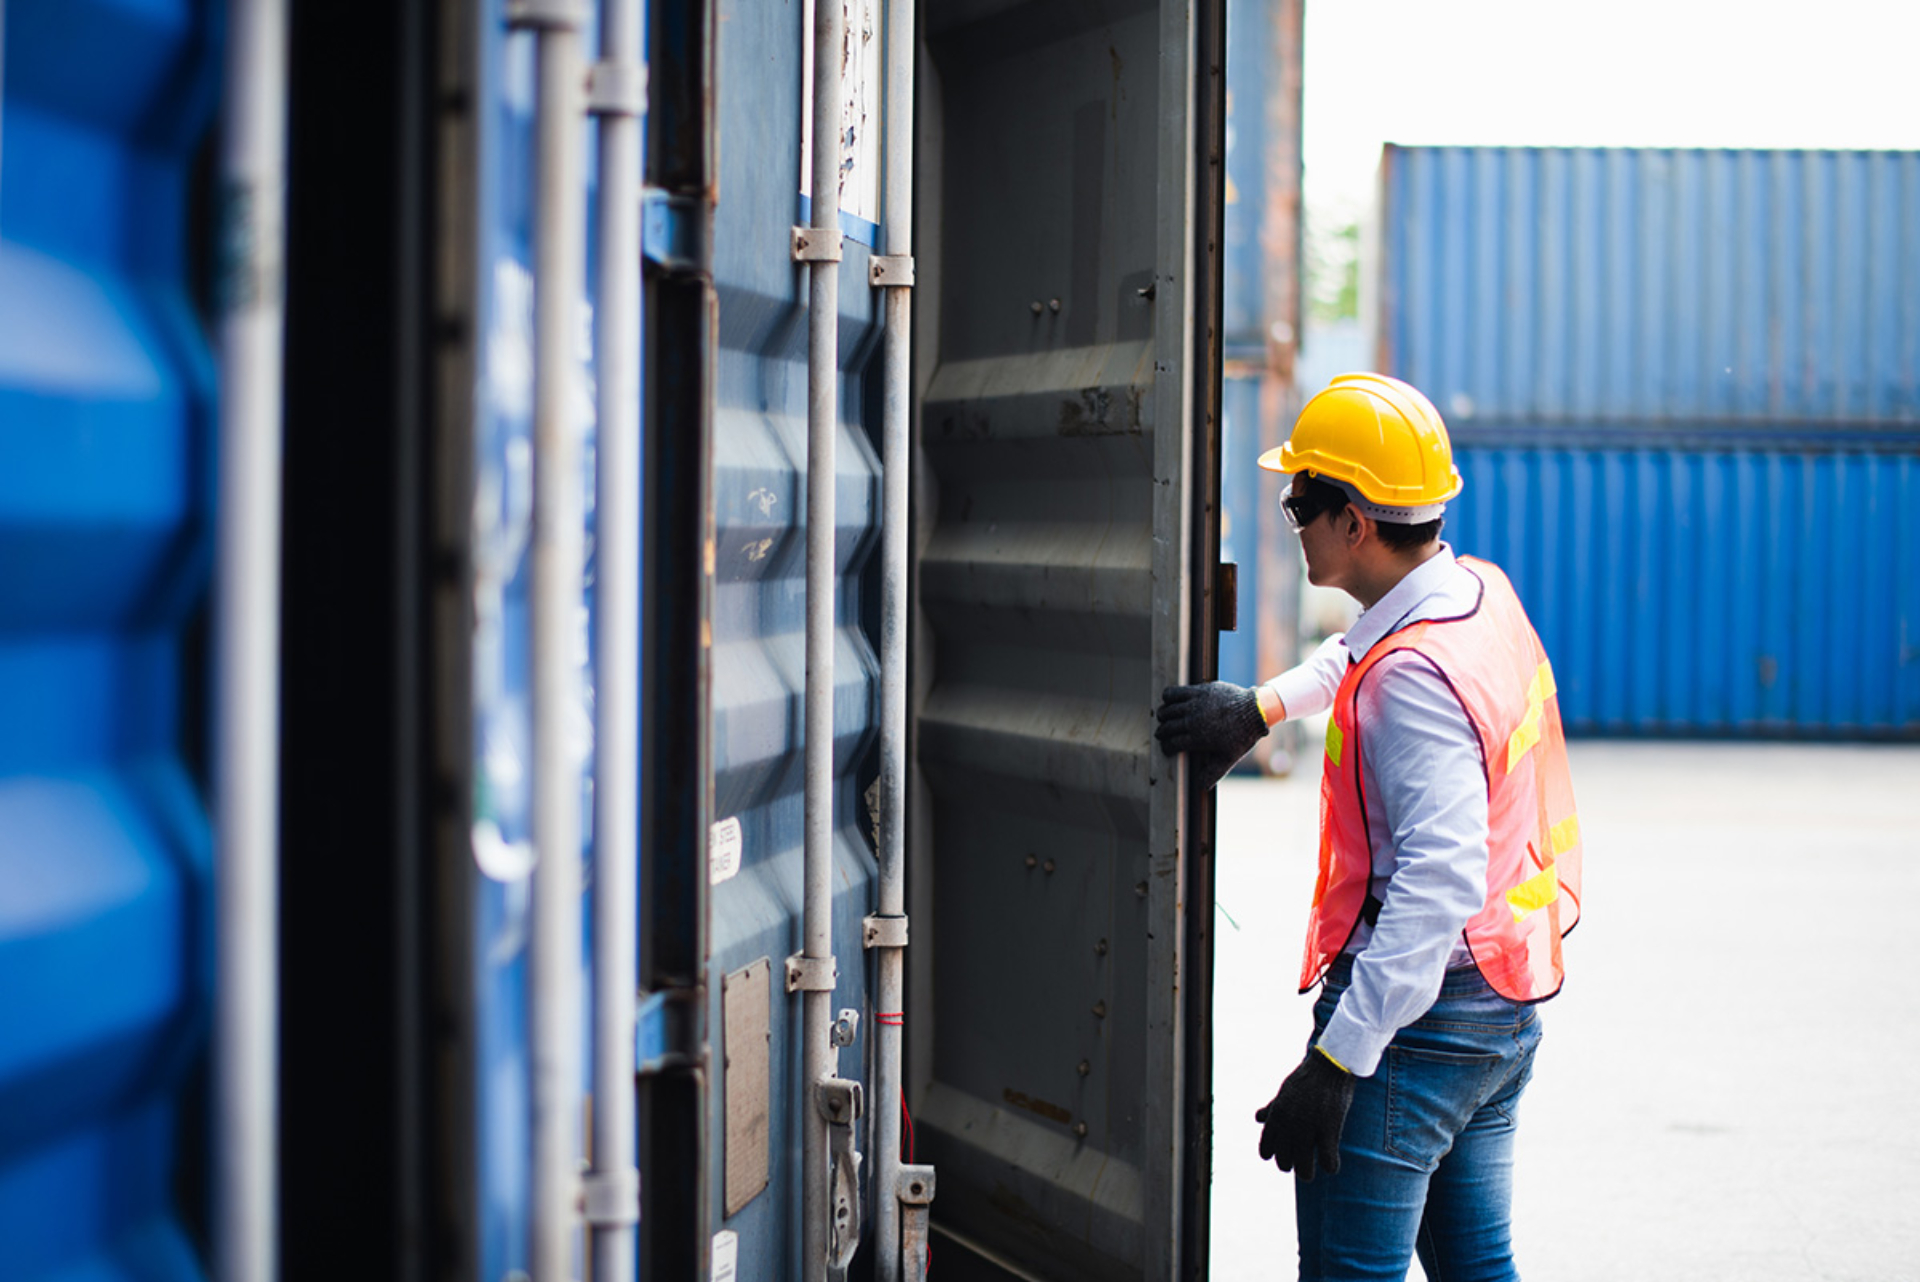 A man in protective gear is opening a shipping container door in a ship yard. There are blue shipping containers in the background. =